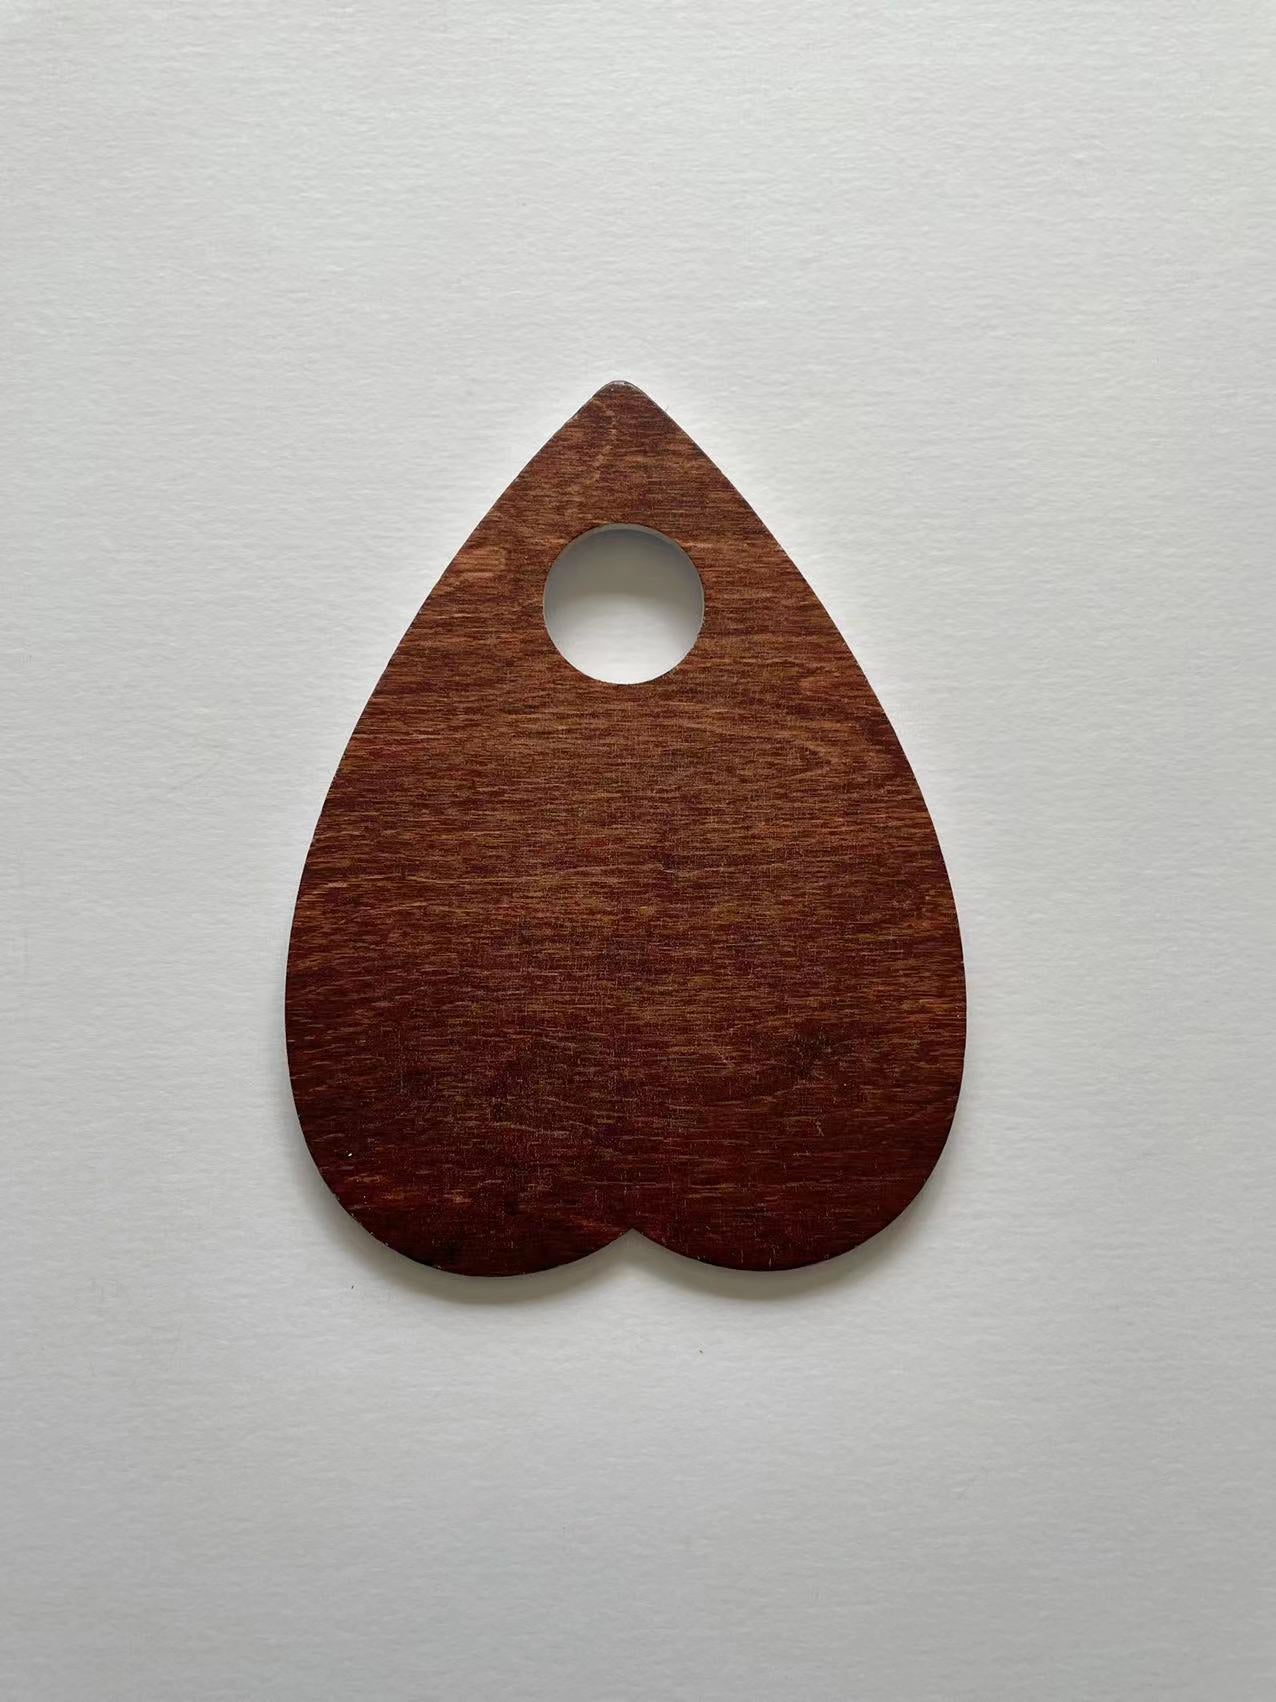 Decorative Wooden Wall hanger  - The Planchette